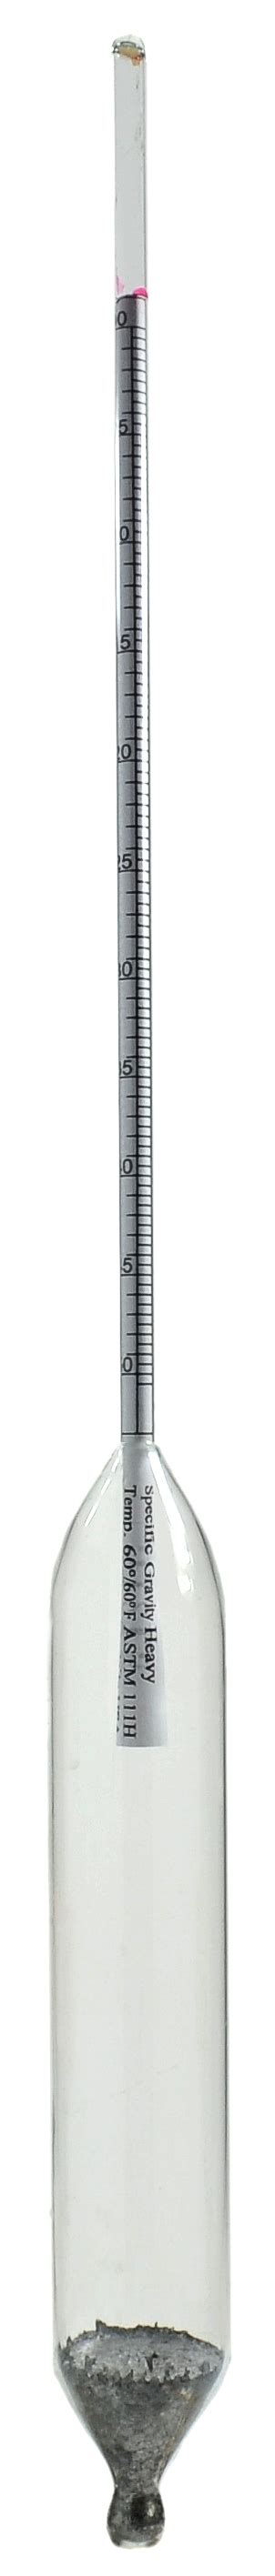 Specific gravity is ratio of some liquid density divided by water density, at referenced temperature. Specific Gravity & Baume Hydrometers